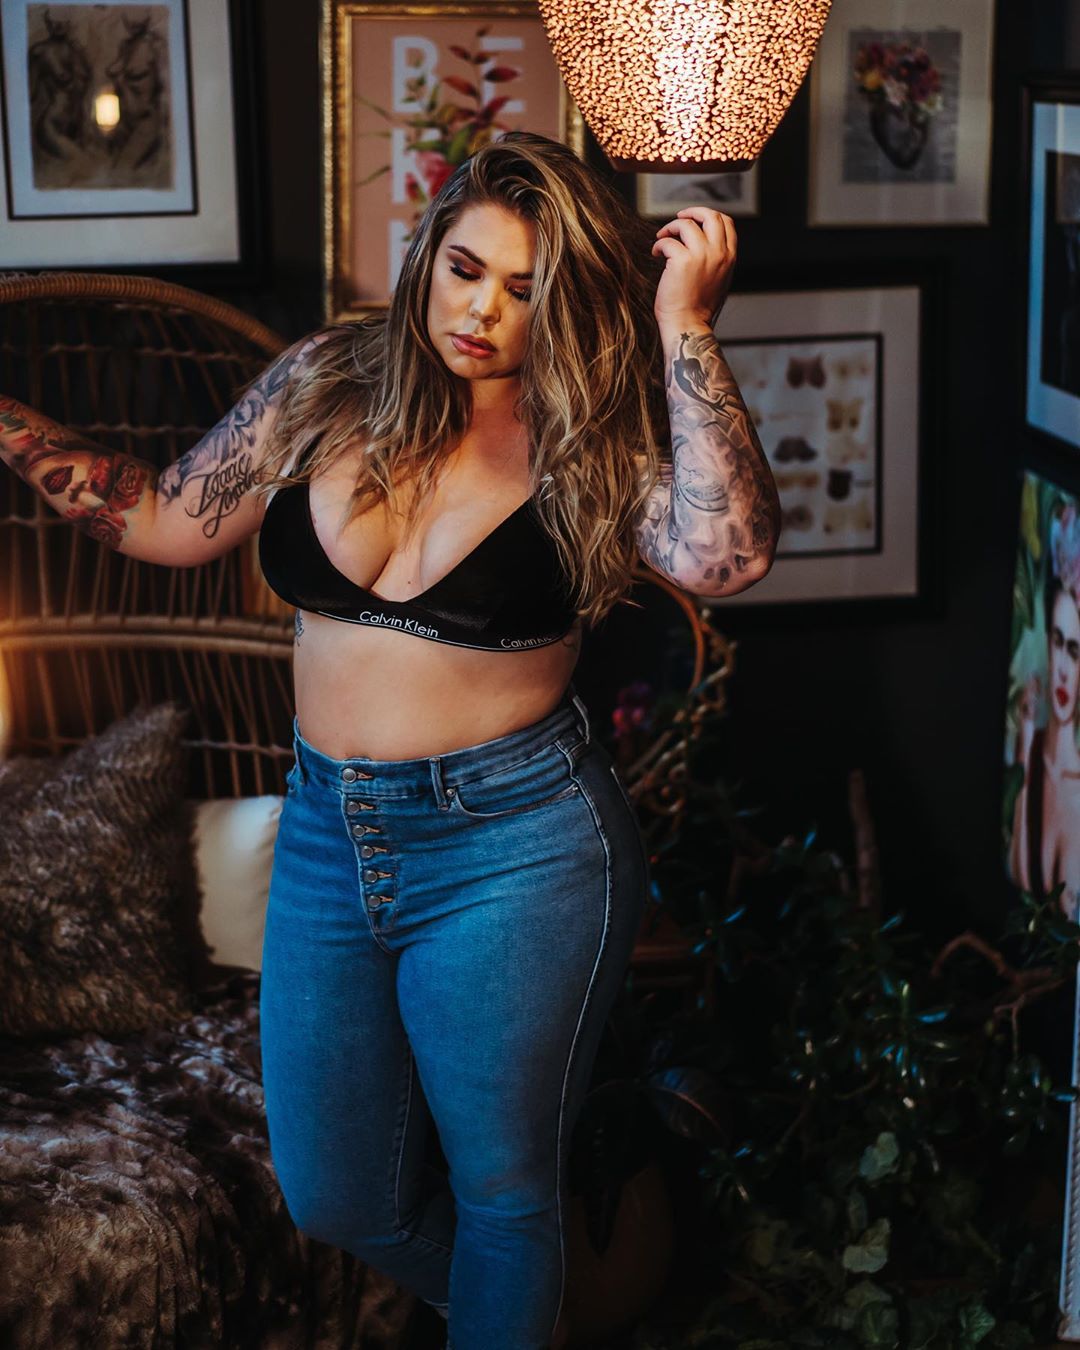 Kailyn Lowry Defends Postpartum Body 2 Months After Son’s Birth: I’m ‘Proud’